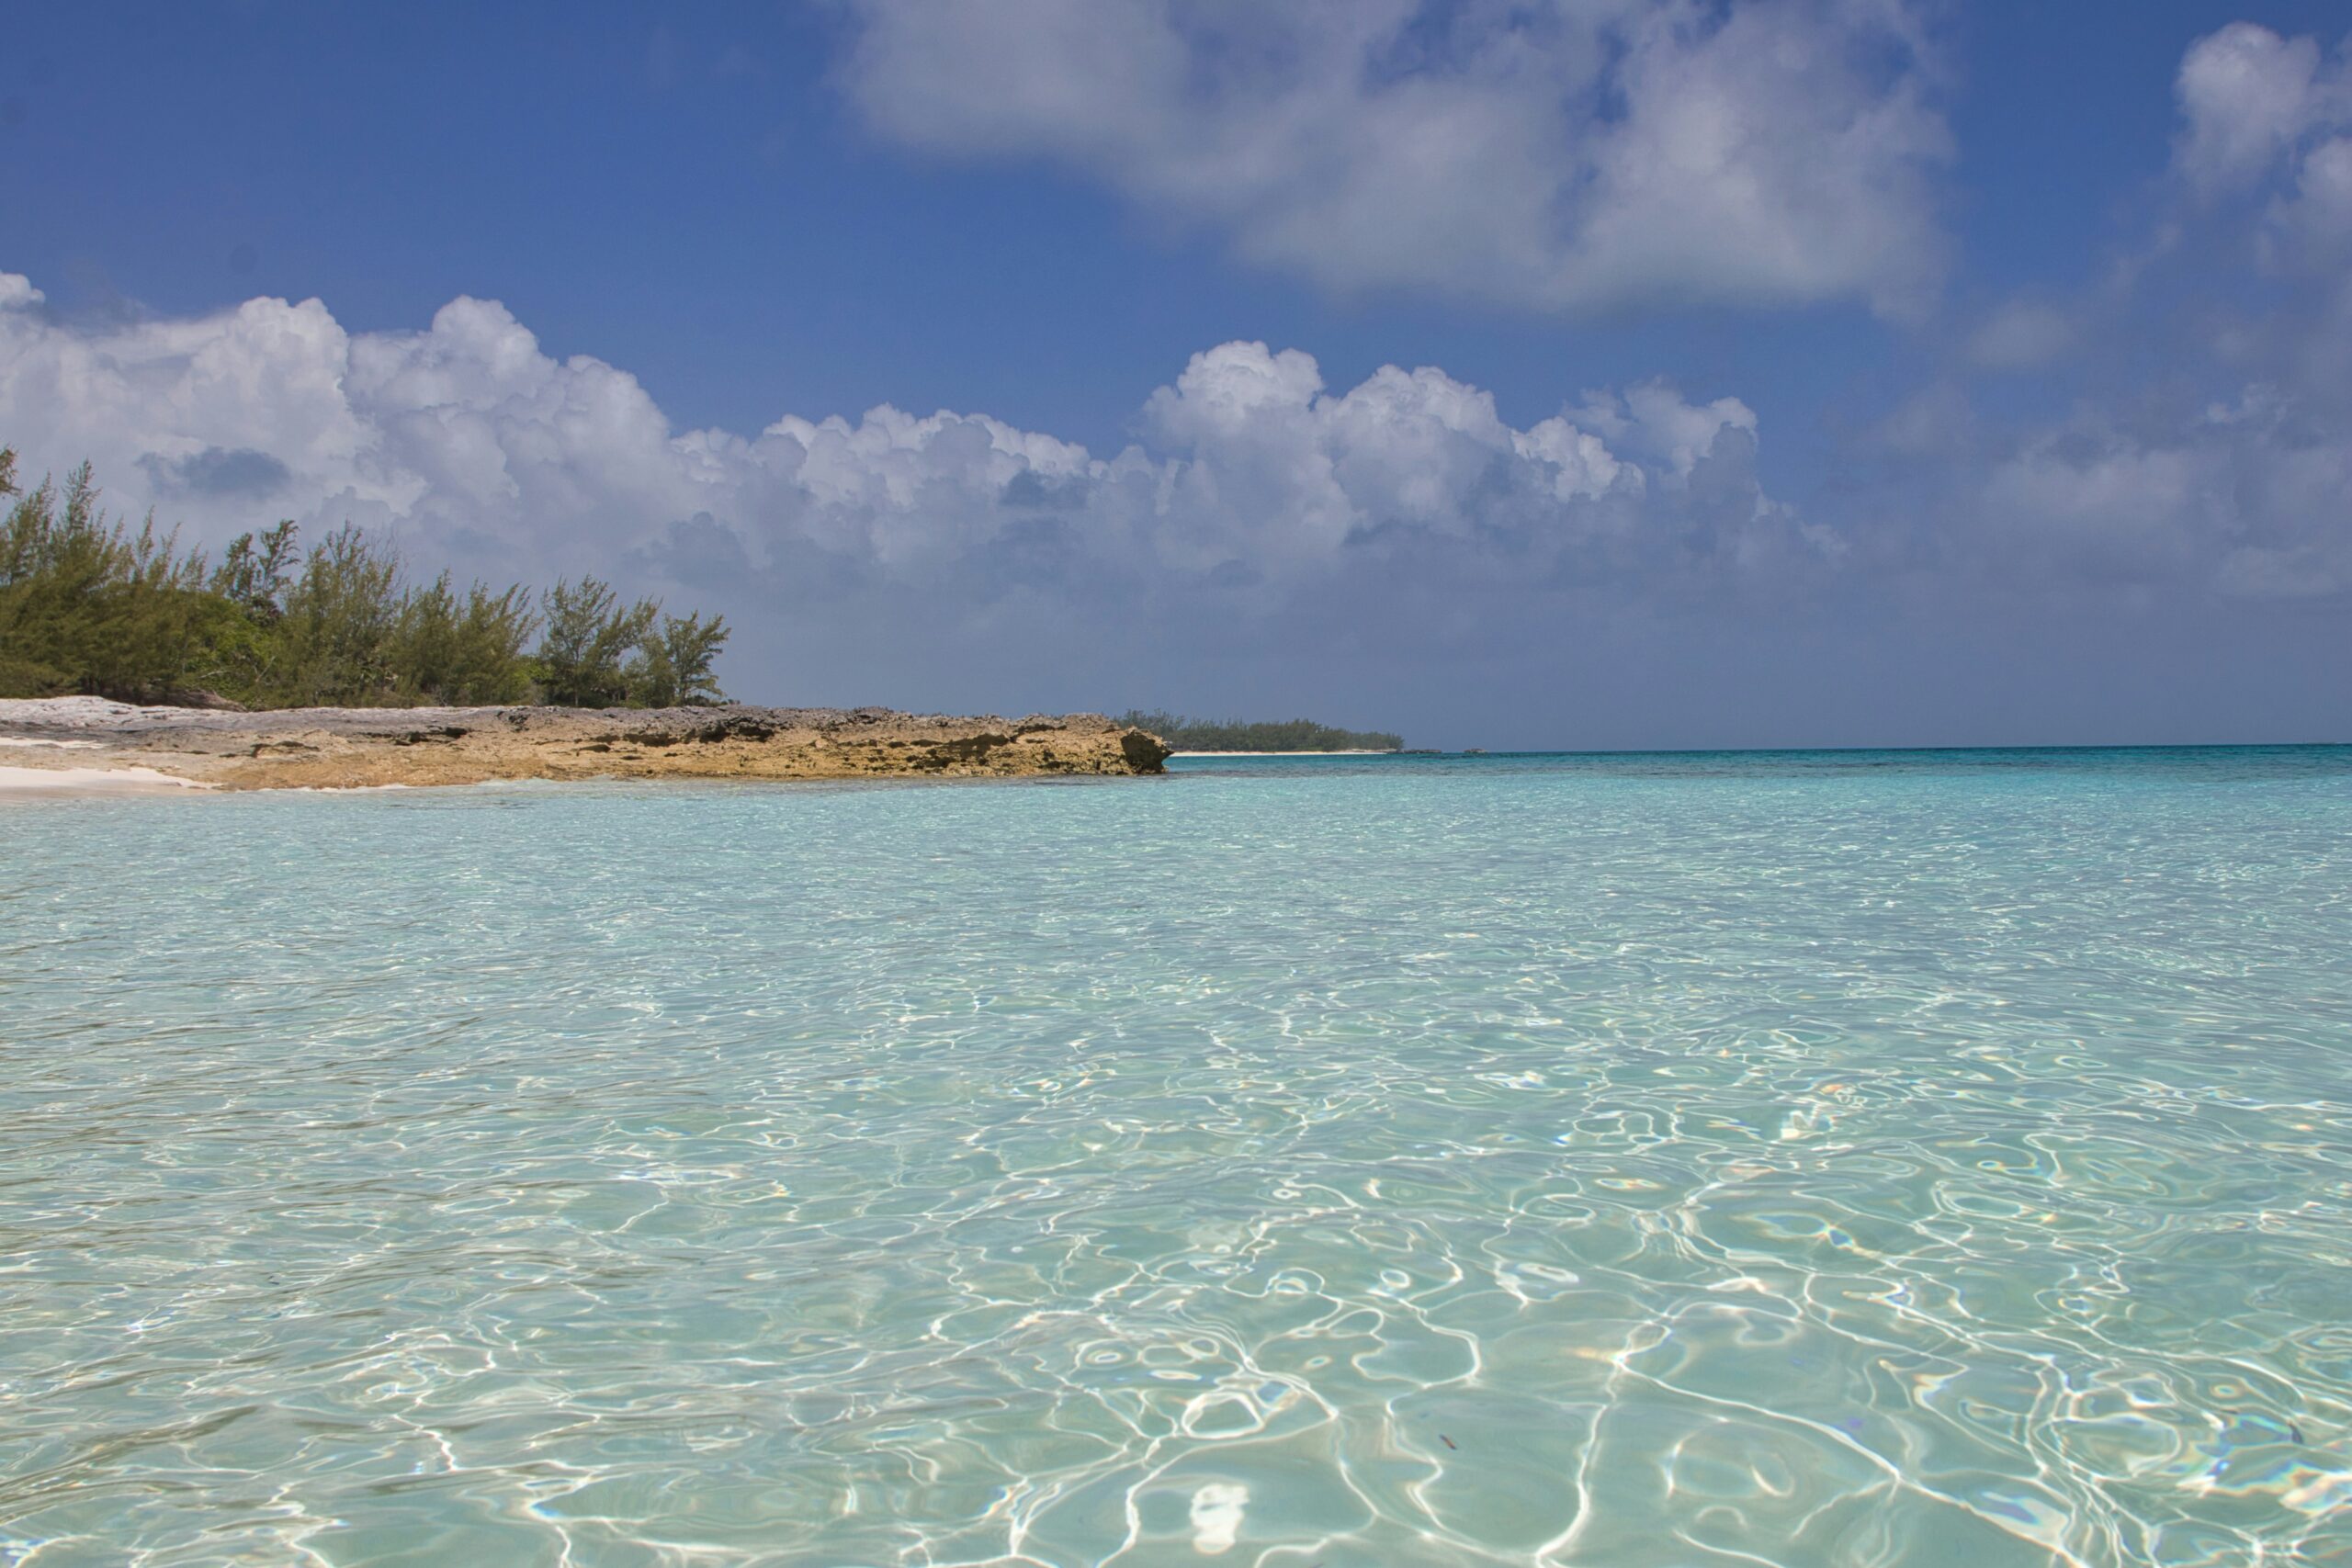 Learn more about the island with flesh eating bacteria that led to a woman losing her leg in the Bahamas.
pictured: the crystal clear waters of Pig Island in the Bahamas